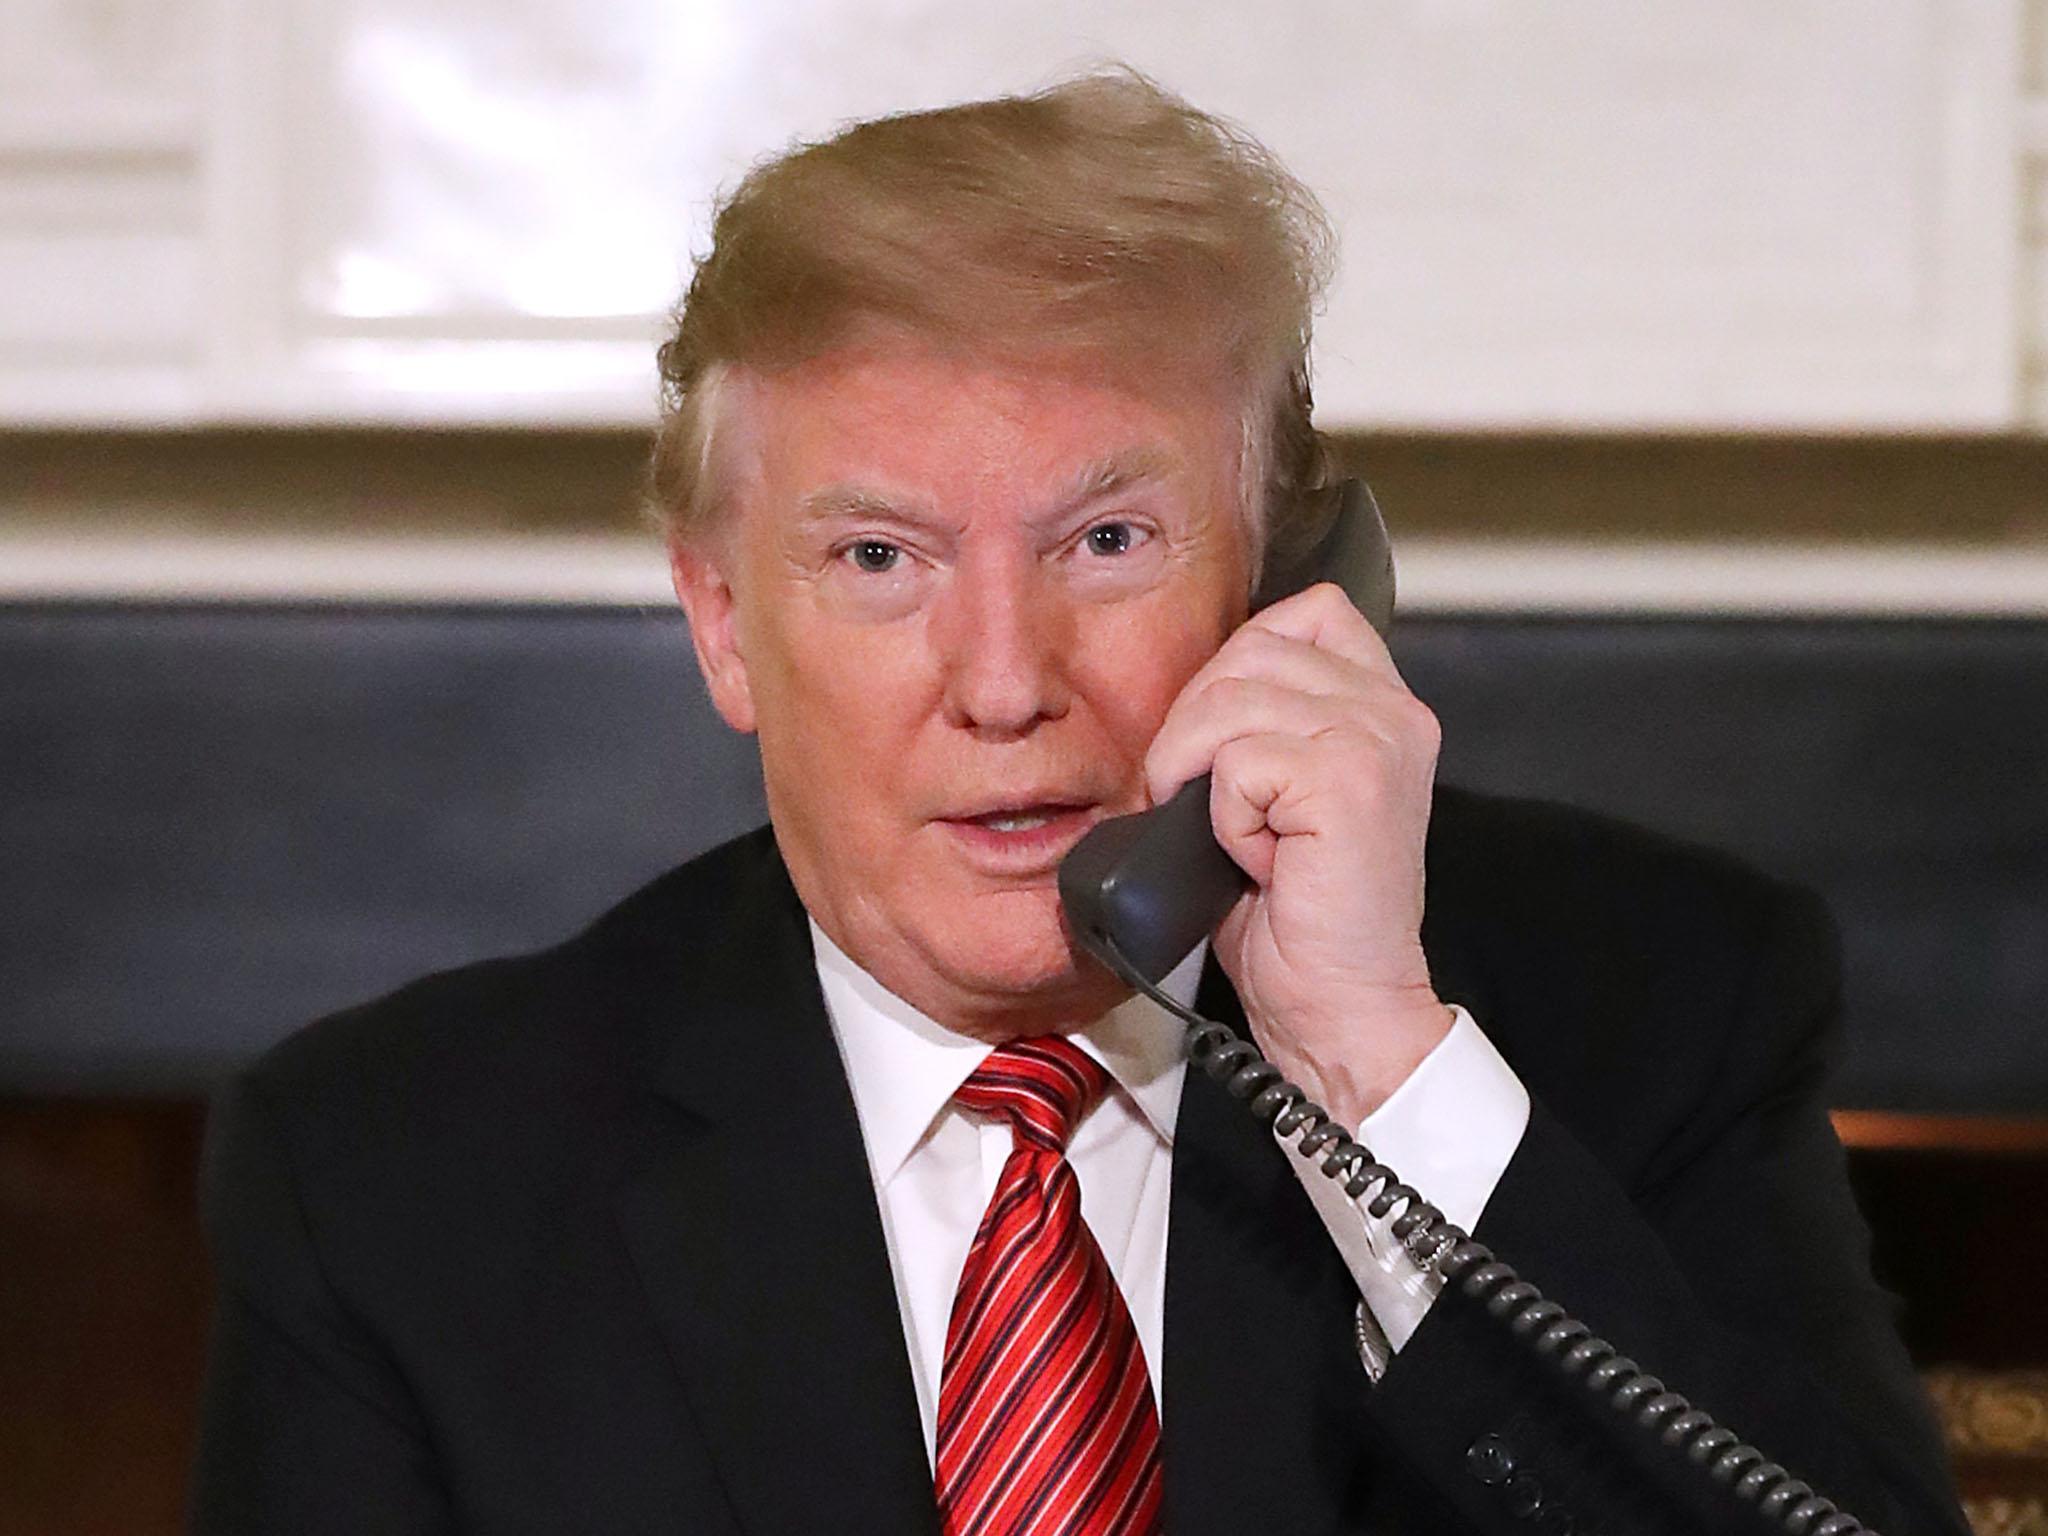 President Trump spoke with Ukrainian president Volodomyr Zelensky in a now infamous phone conversation on 25 July